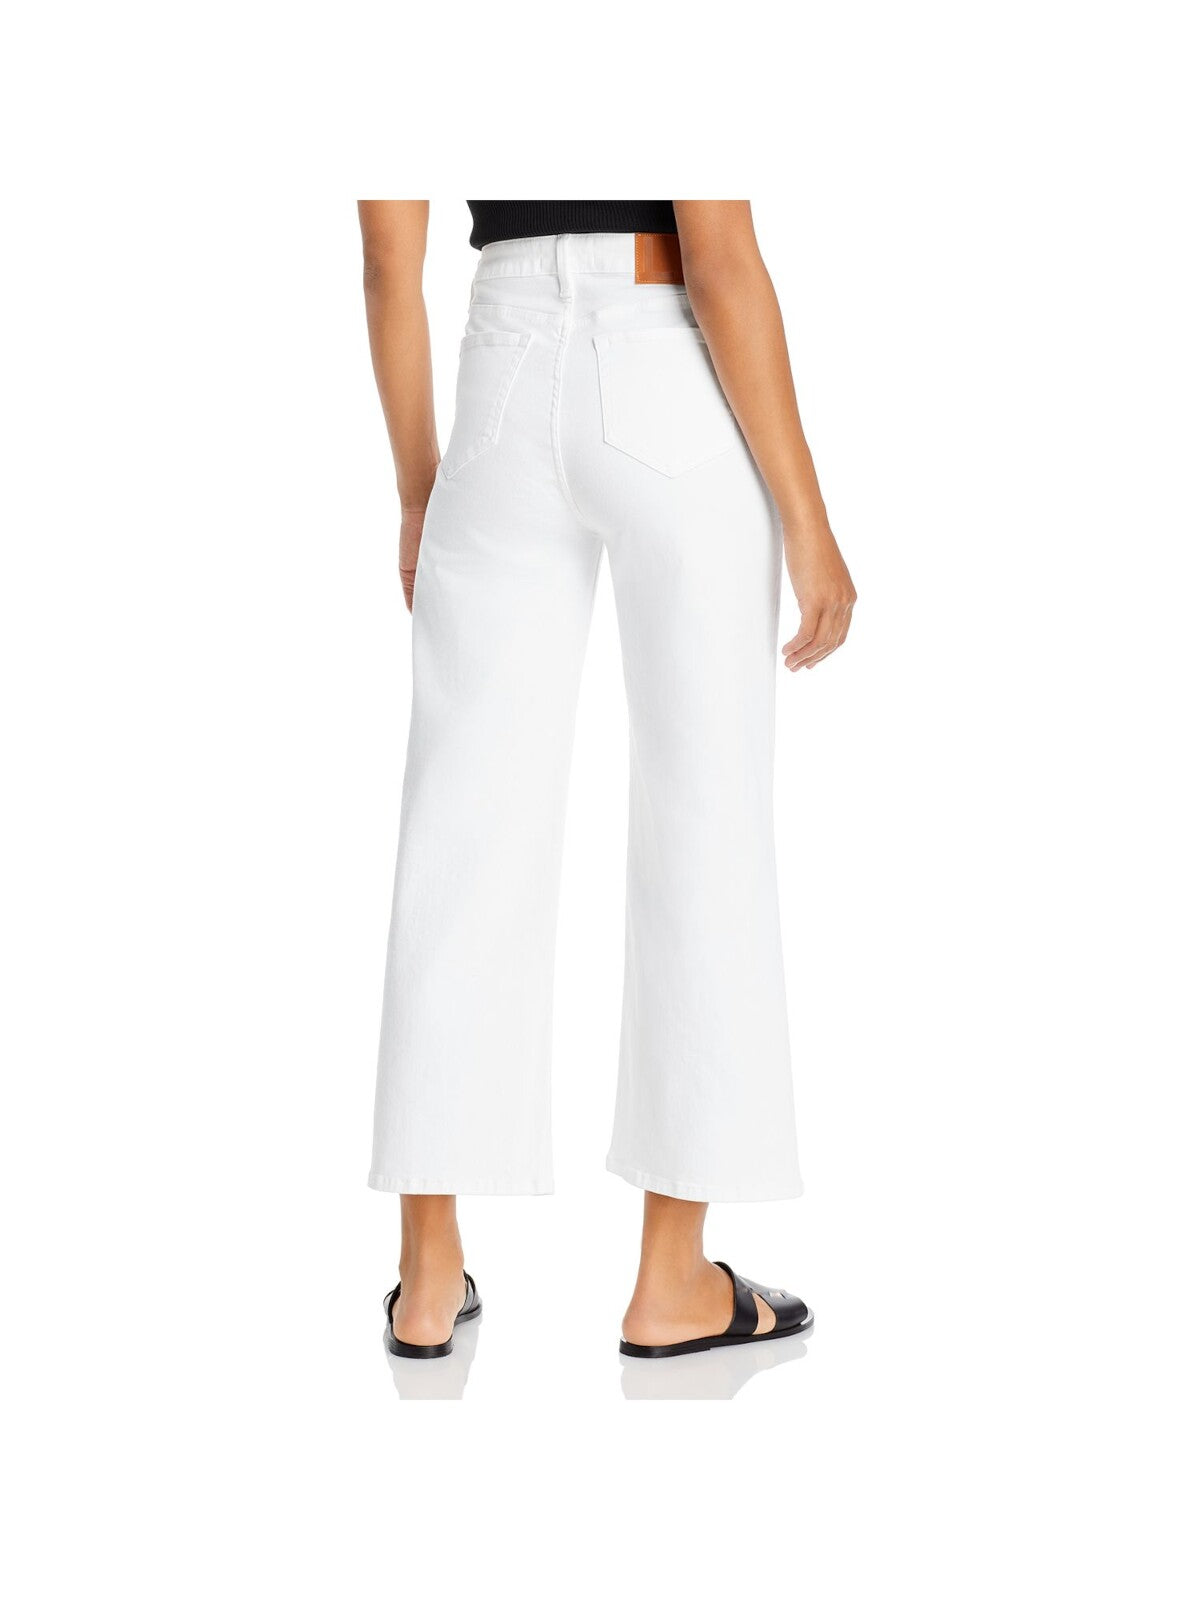 LAFAYETTE 148 Womens Stretch Zippered Pocketed Slightly Cropped Wide-leg High Waist Jeans